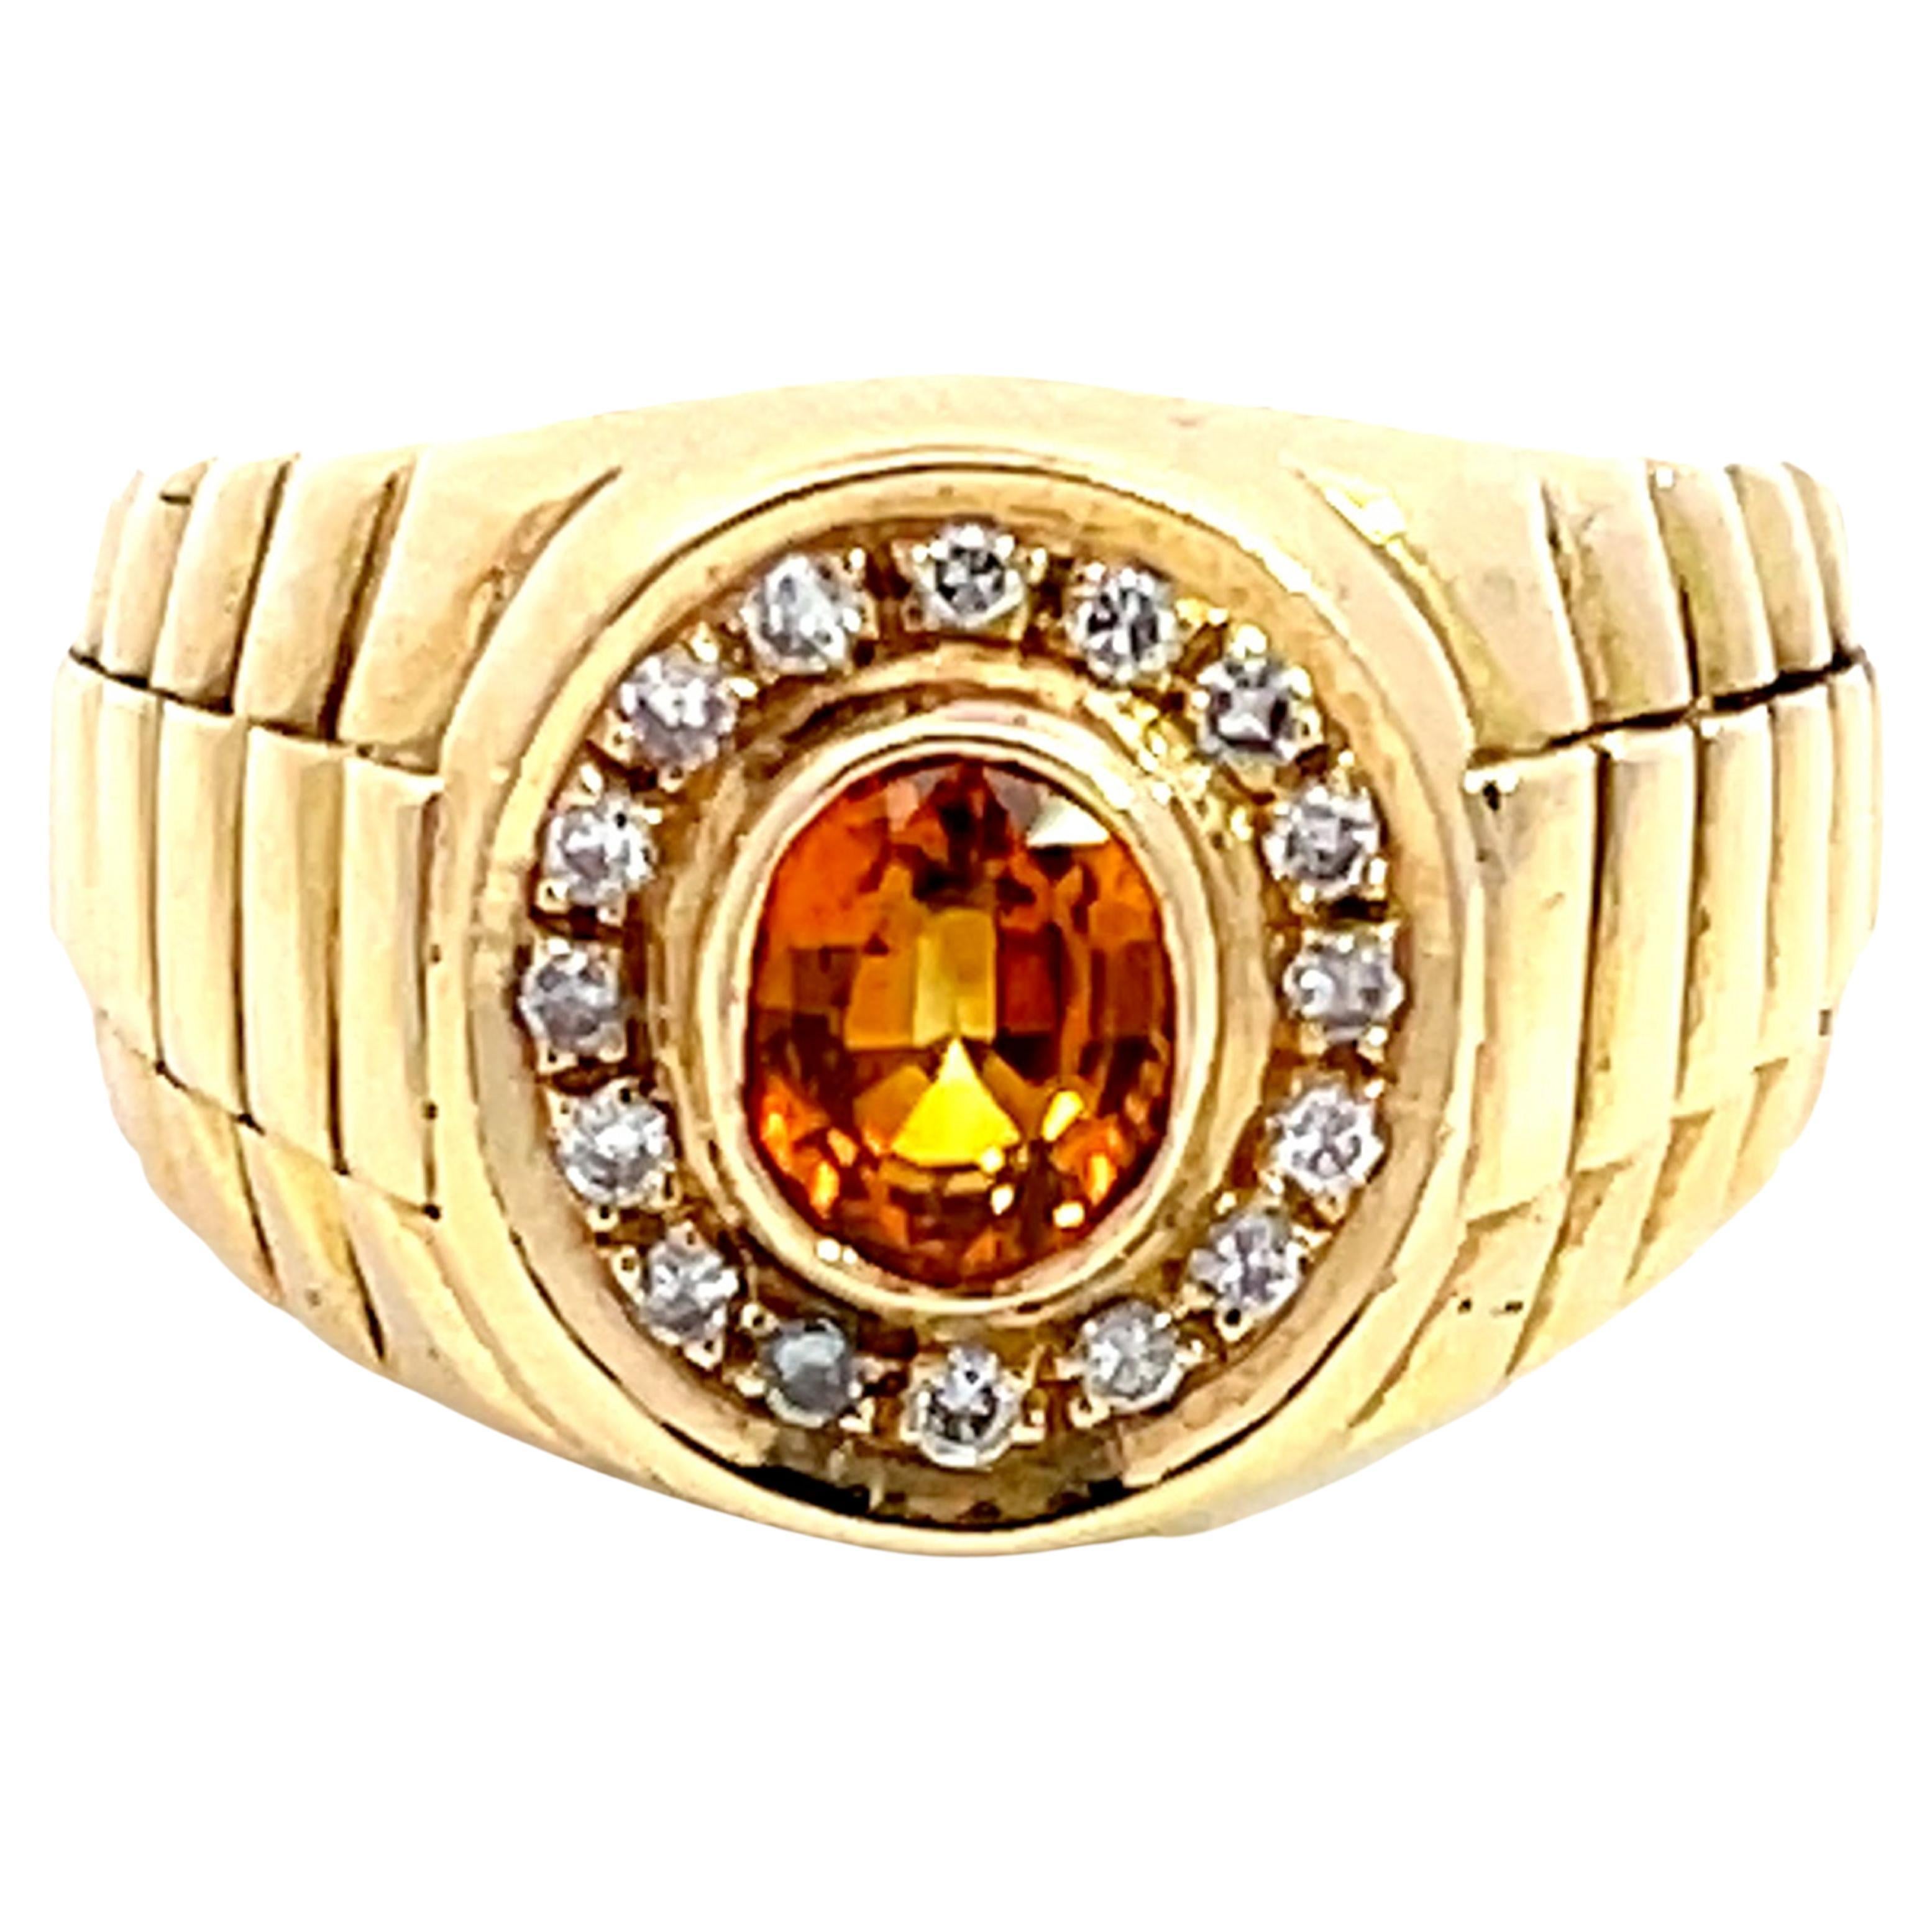 Vintage Citrine Diamond Halo Rolex Ring in 14k Yellow Gold For Sale